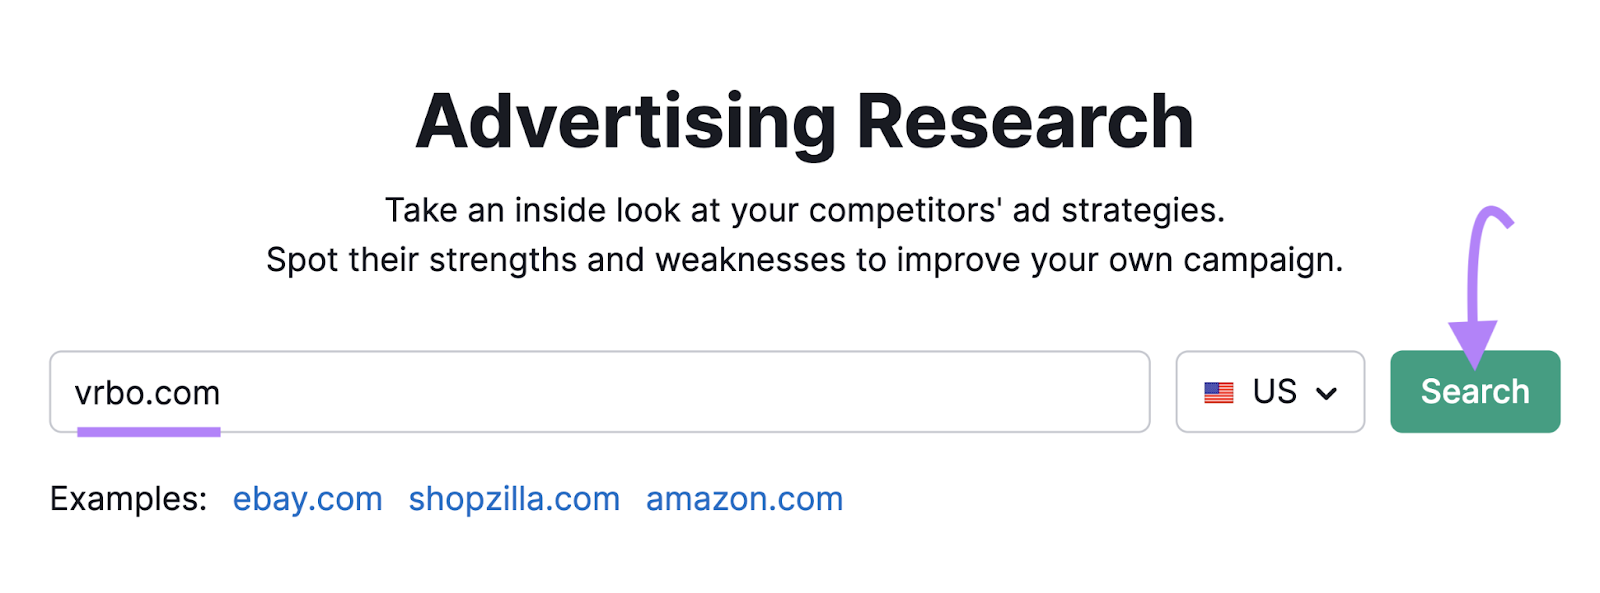 "vrbo.com" entered into the Advertising Research tool search bar